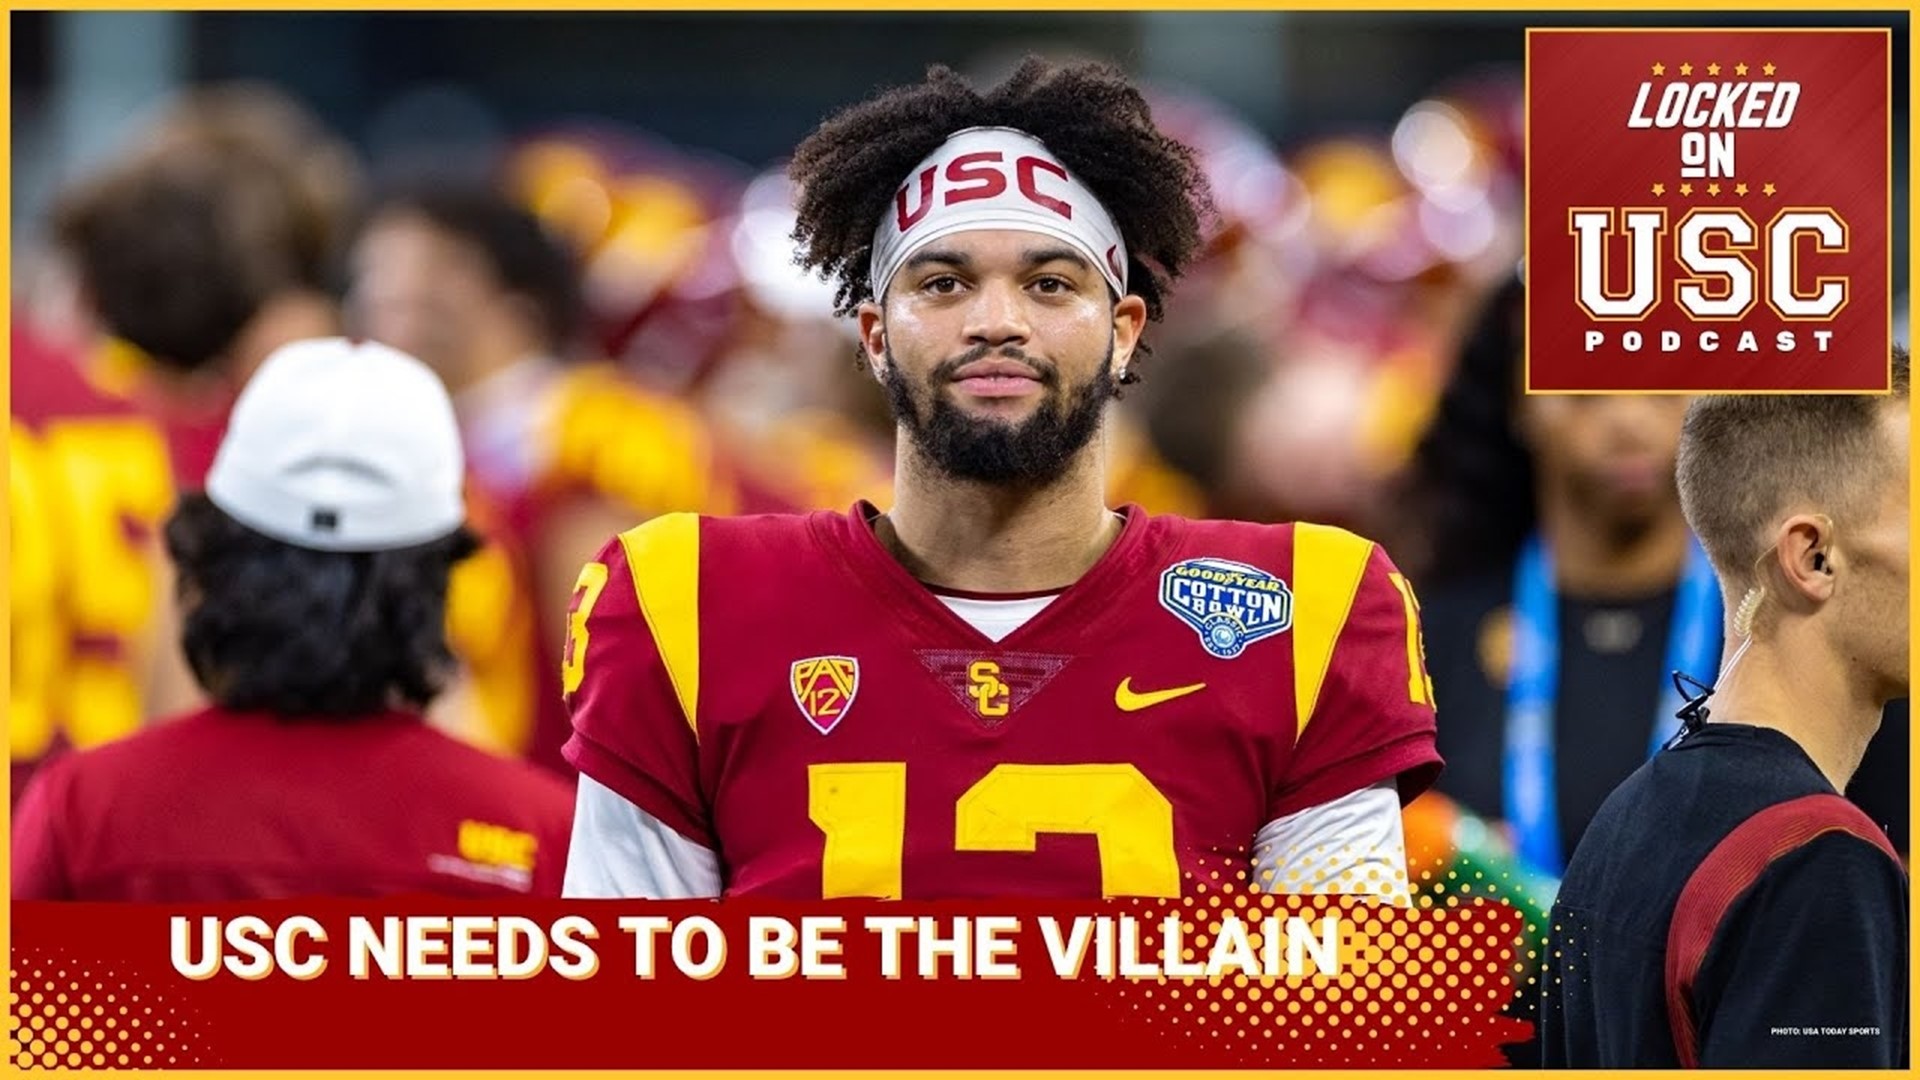 When USC hits the road Lincoln Riley said that the team needs to embrace the role of playing the villain.